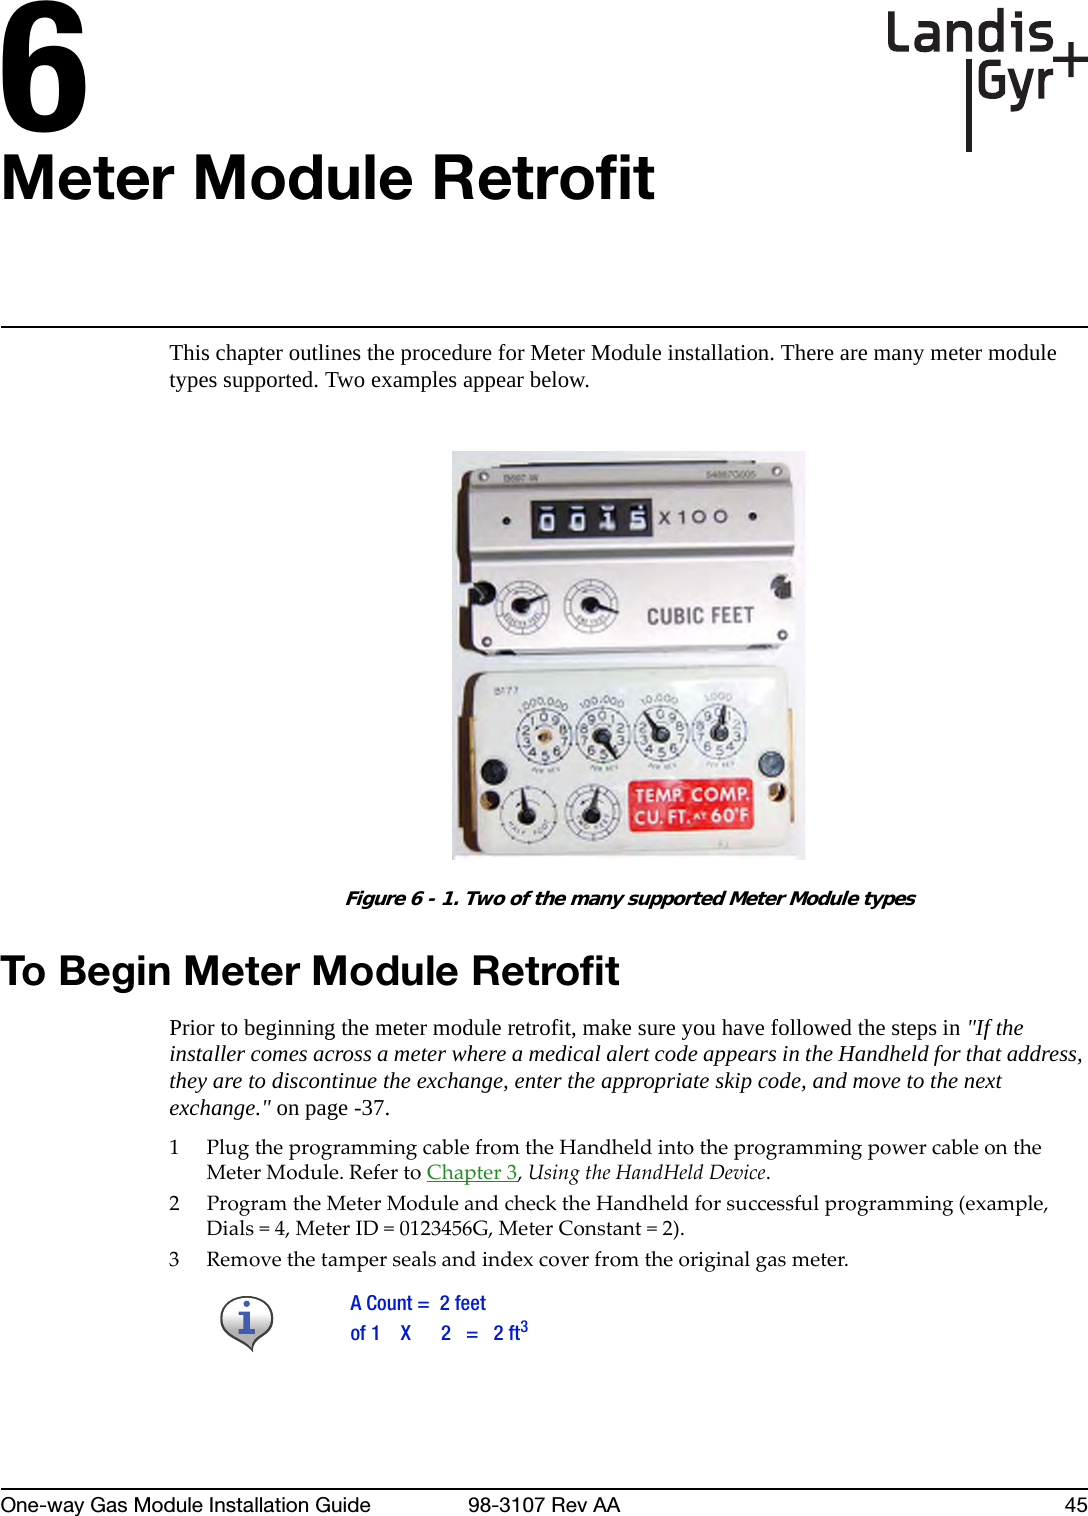 6One-way Gas Module Installation Guide 98-3107 Rev AA 45Meter Module RetrofitThis chapter outlines the procedure for Meter Module installation. There are many meter module types supported. Two examples appear below.Figure 6 - 1. Two of the many supported Meter Module typesTo Begin Meter Module RetrofitPrior to beginning the meter module retrofit, make sure you have followed the steps in &quot;If the installer comes across a meter where a medical alert code appears in the Handheld for that address, they are to discontinue the exchange, enter the appropriate skip code, and move to the next exchange.&quot; on page -37.1PlugtheprogrammingcablefromtheHandheldintotheprogrammingpowercableontheMeterModule.RefertoChapter 3,UsingtheHandHeldDevice.2ProgramtheMeterModuleandchecktheHandheldforsuccessfulprogramming(example,Dials=4,MeterID=0123456G,MeterConstant=2).3Removethetampersealsandindexcoverfromtheoriginalgasmeter.A Count =  2 feetof 1    X      2   =   2 ft3